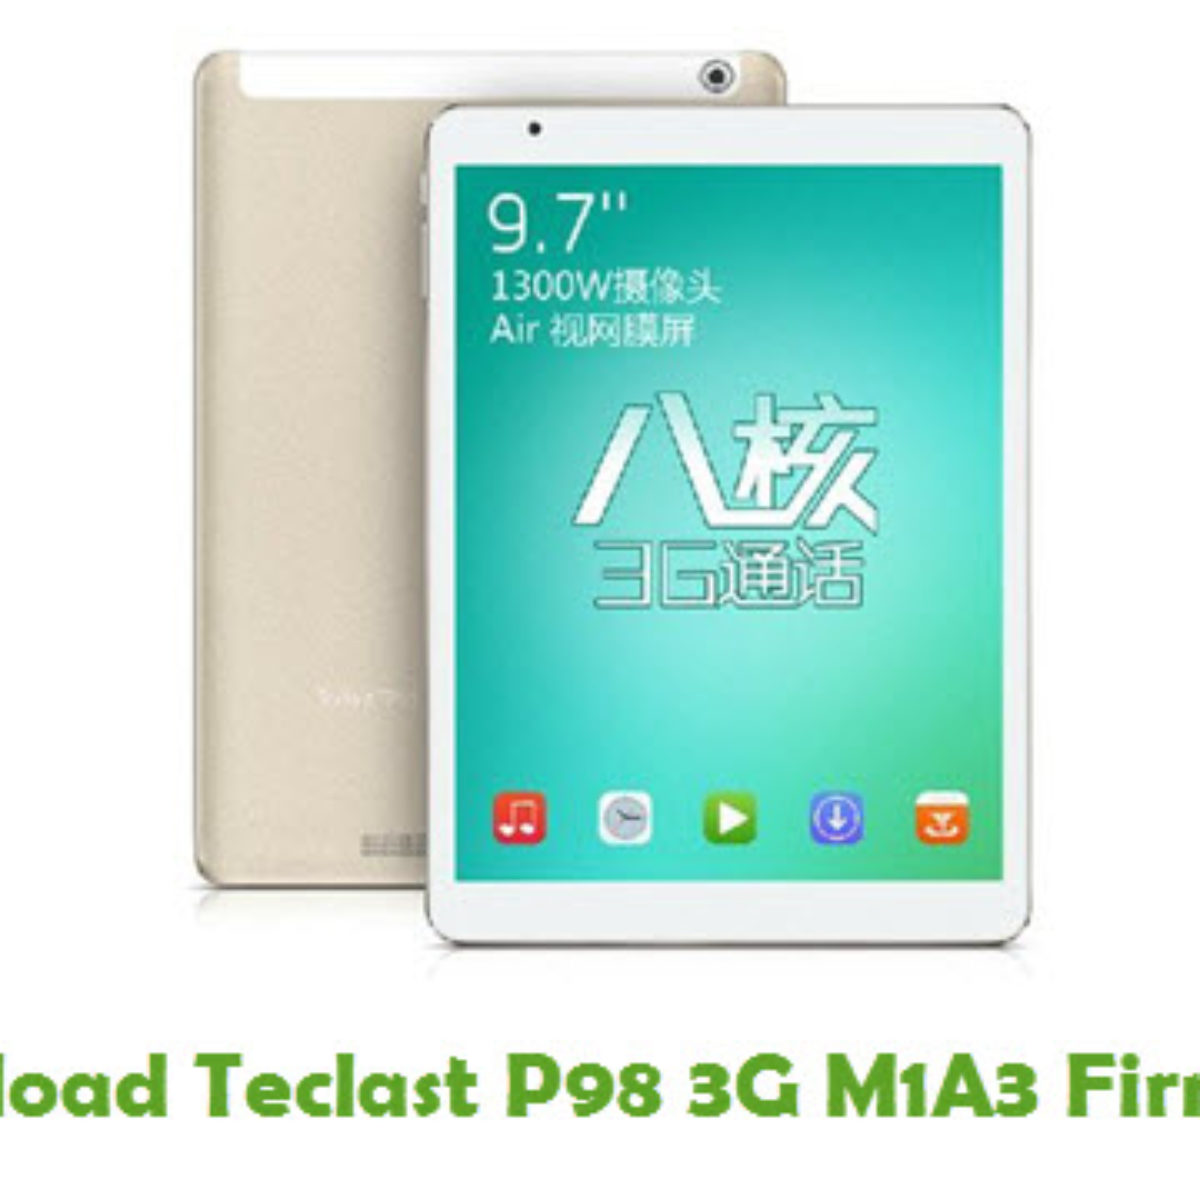 Download Teclast P98 3g M1a3 Firmware Android Stock Rom Files